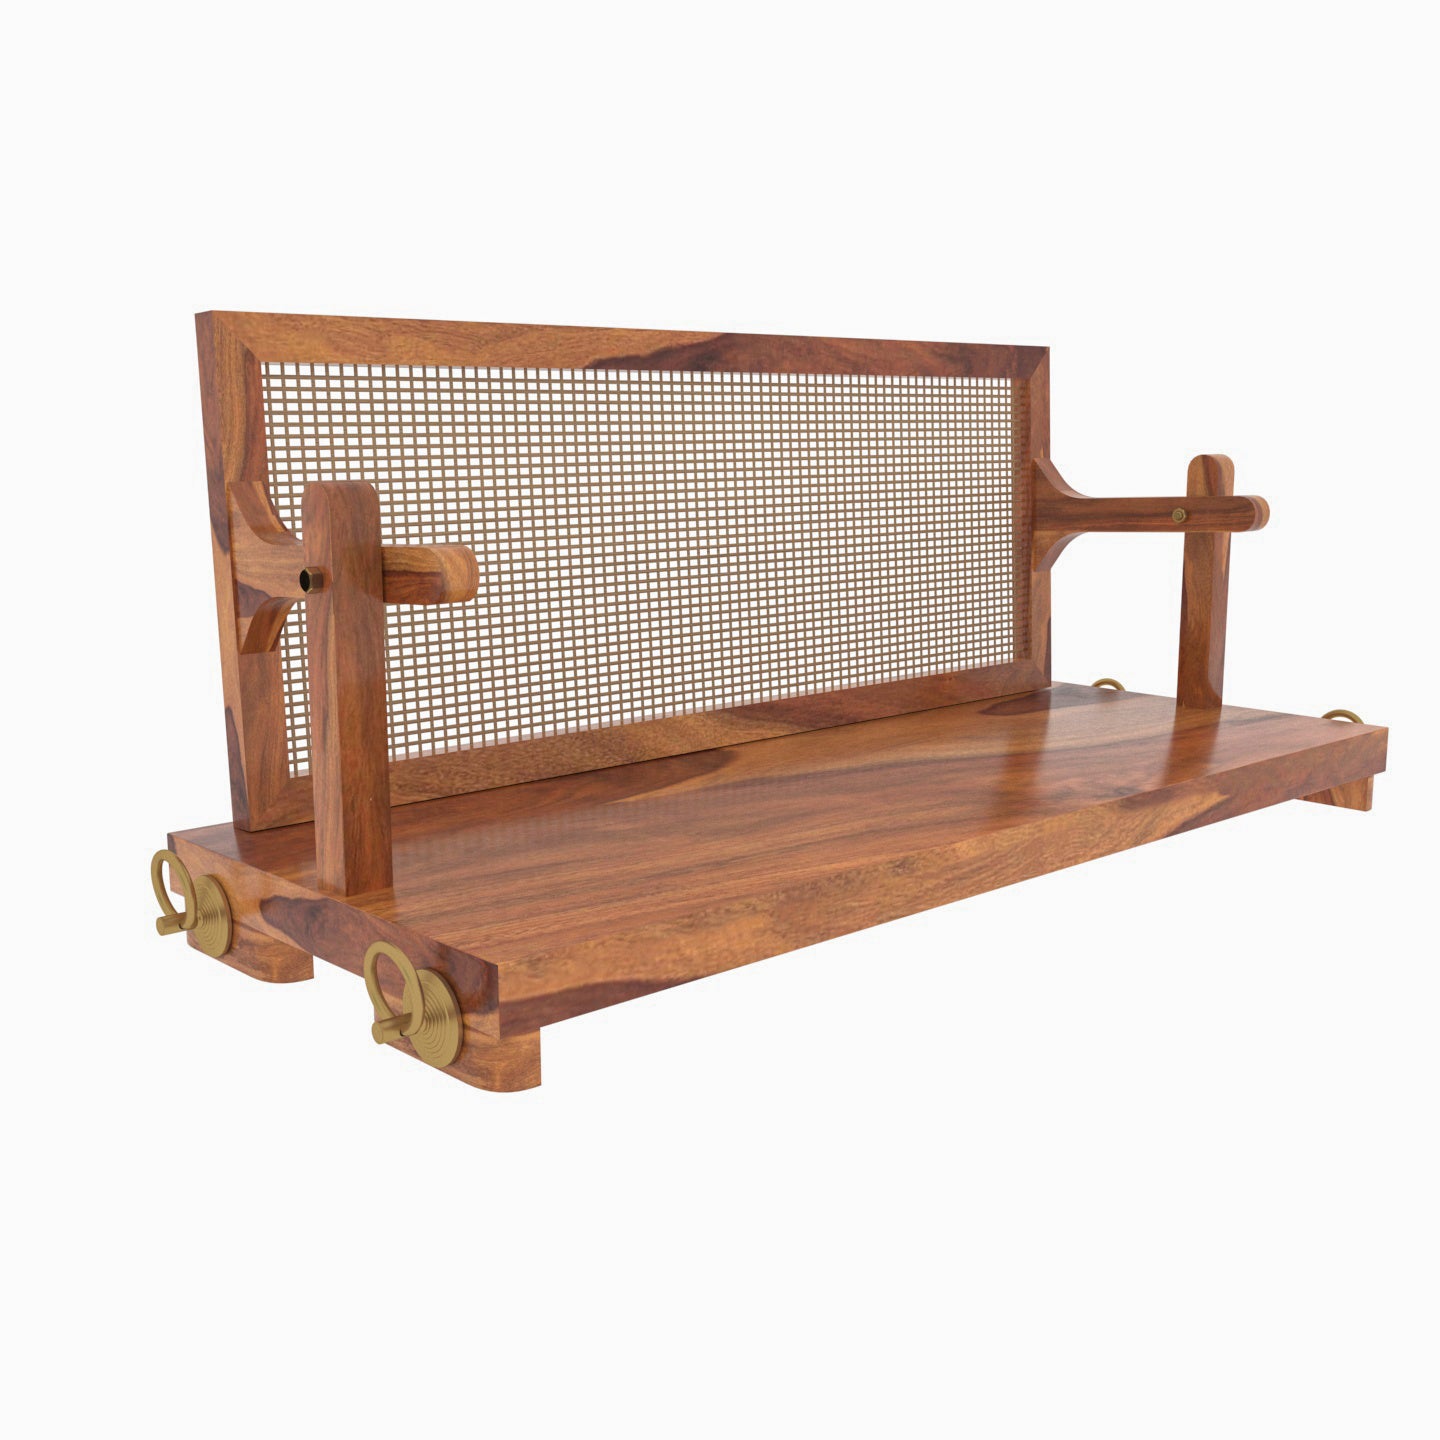 Adorable Thin Cane Reversible Handmade Wooden Swing for Home Swing